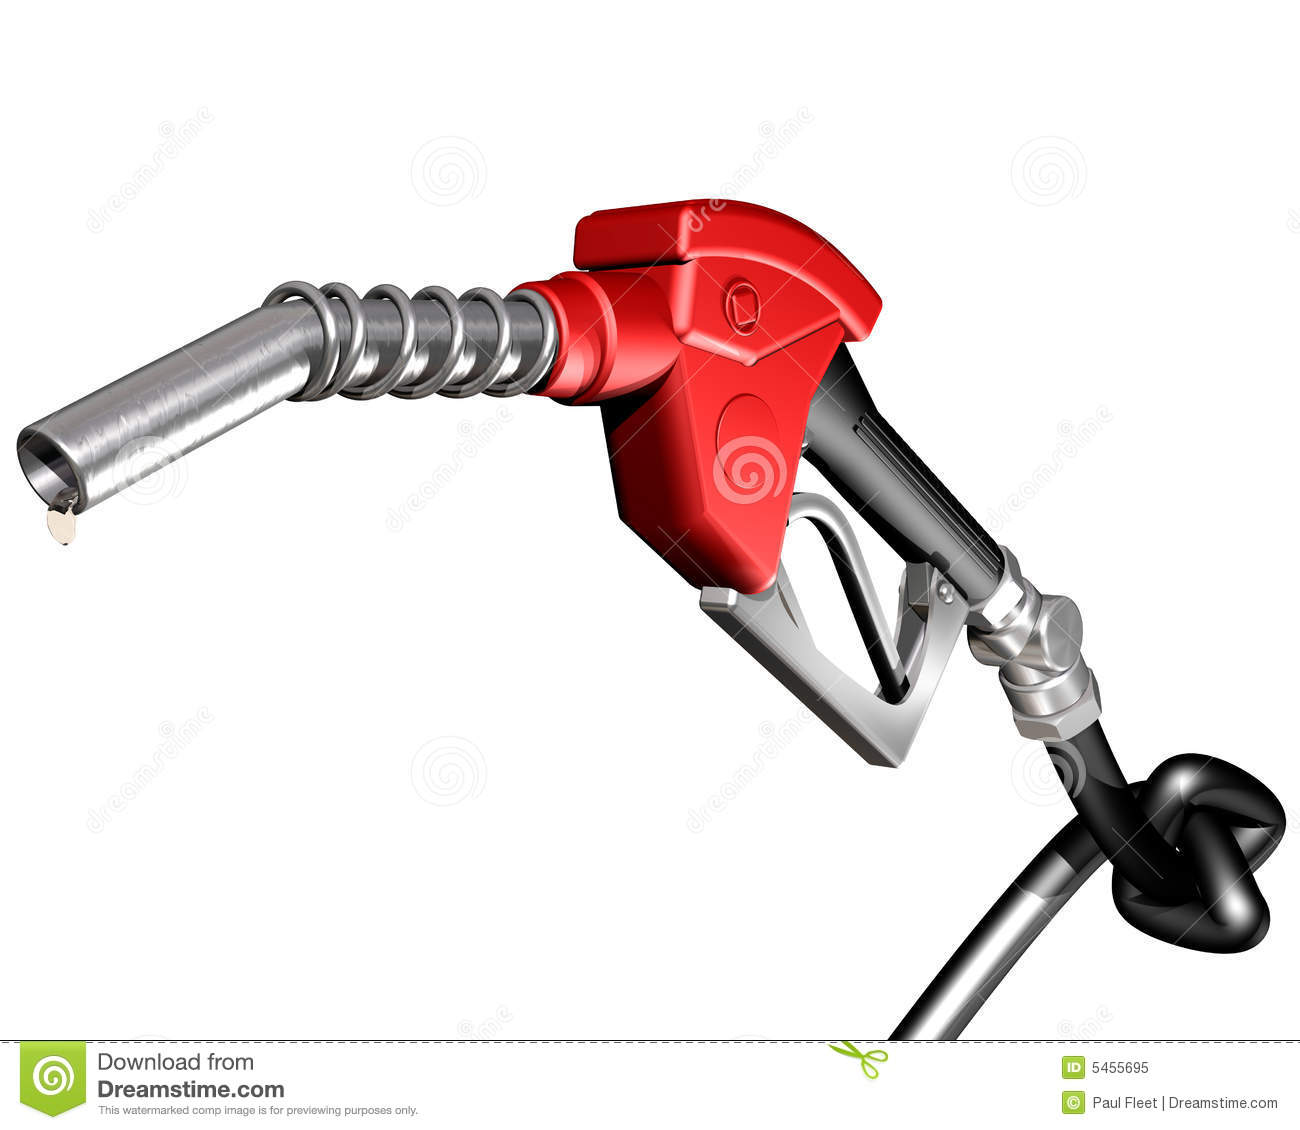 Of A Dripping Gasoline Pump Nozzle And Hose With A Knot Tied In It